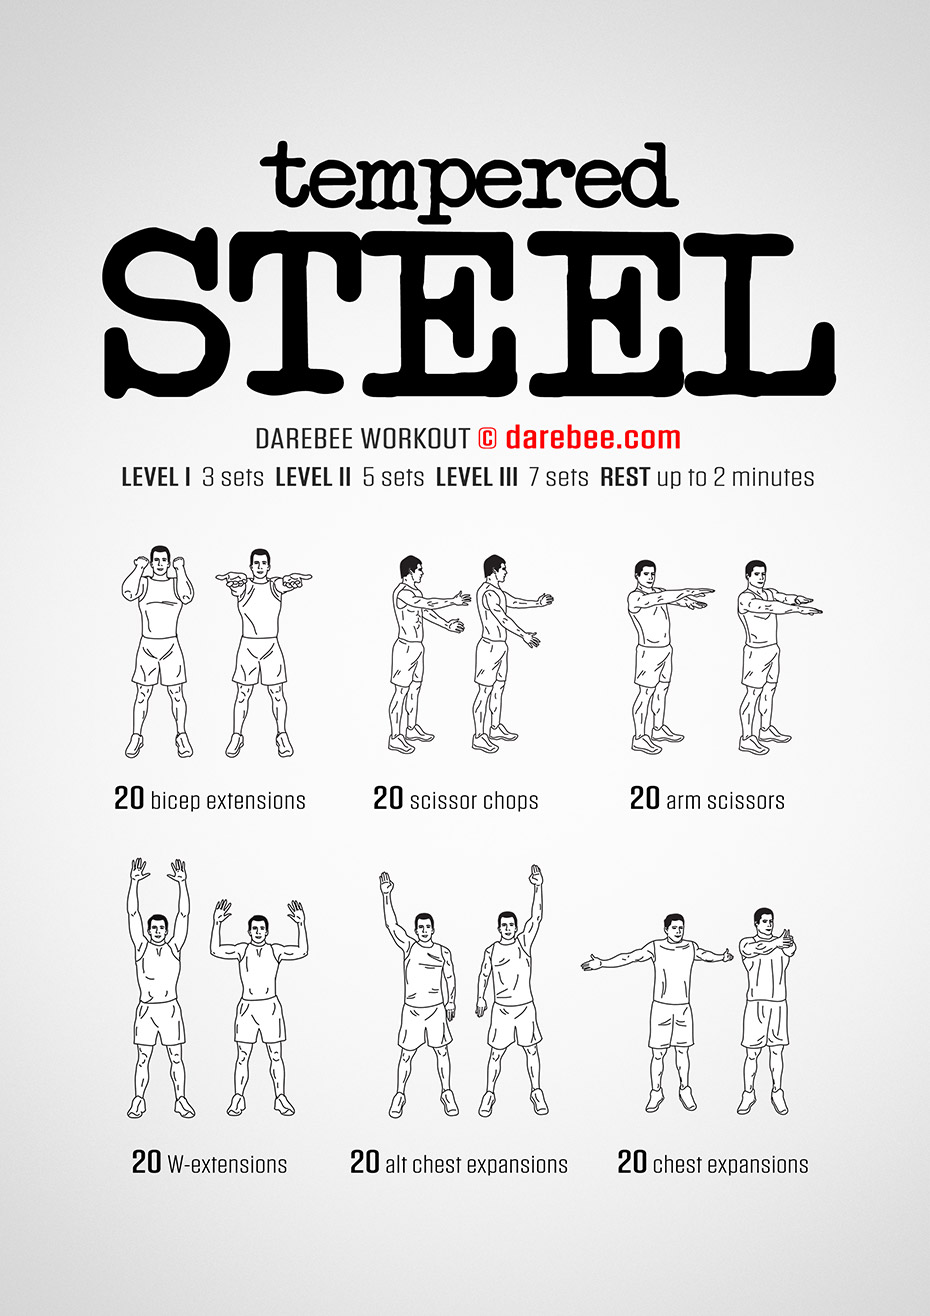 Tempered Steel is a DAREBEE home fitness no-equipment upper body workout that helps you develop a stronger upper body without equipment, at home.